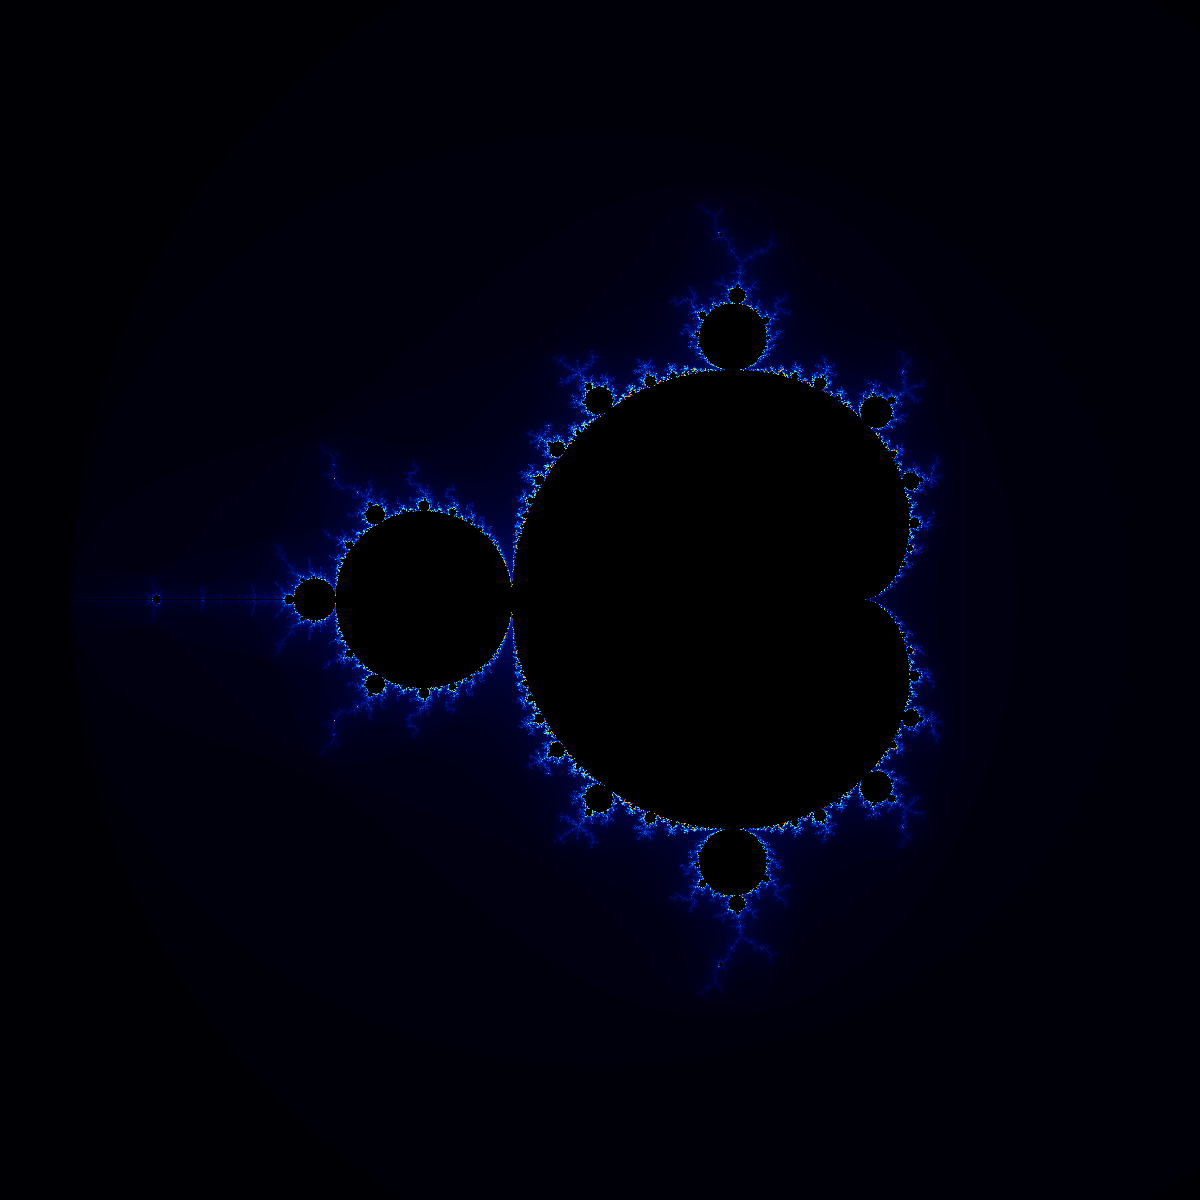 Mandelbrot set full scale smooth colors